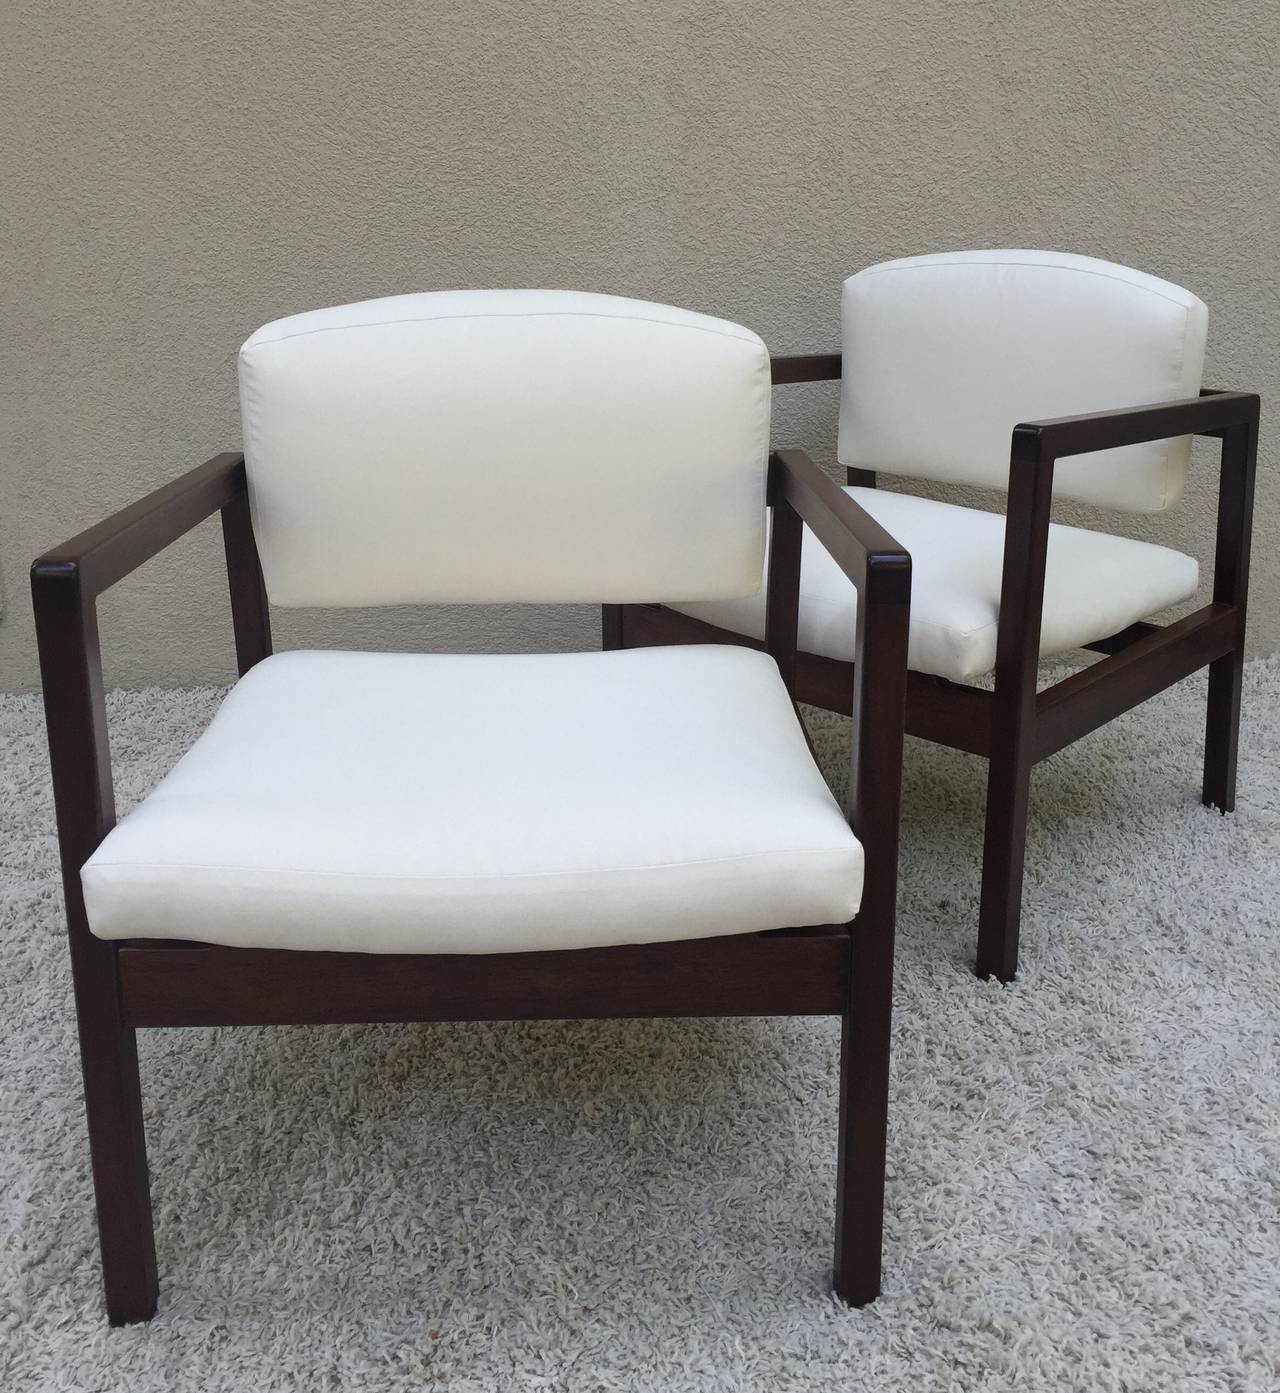 20th Century Pair of Rare Jens Risom Rosewood Chairs